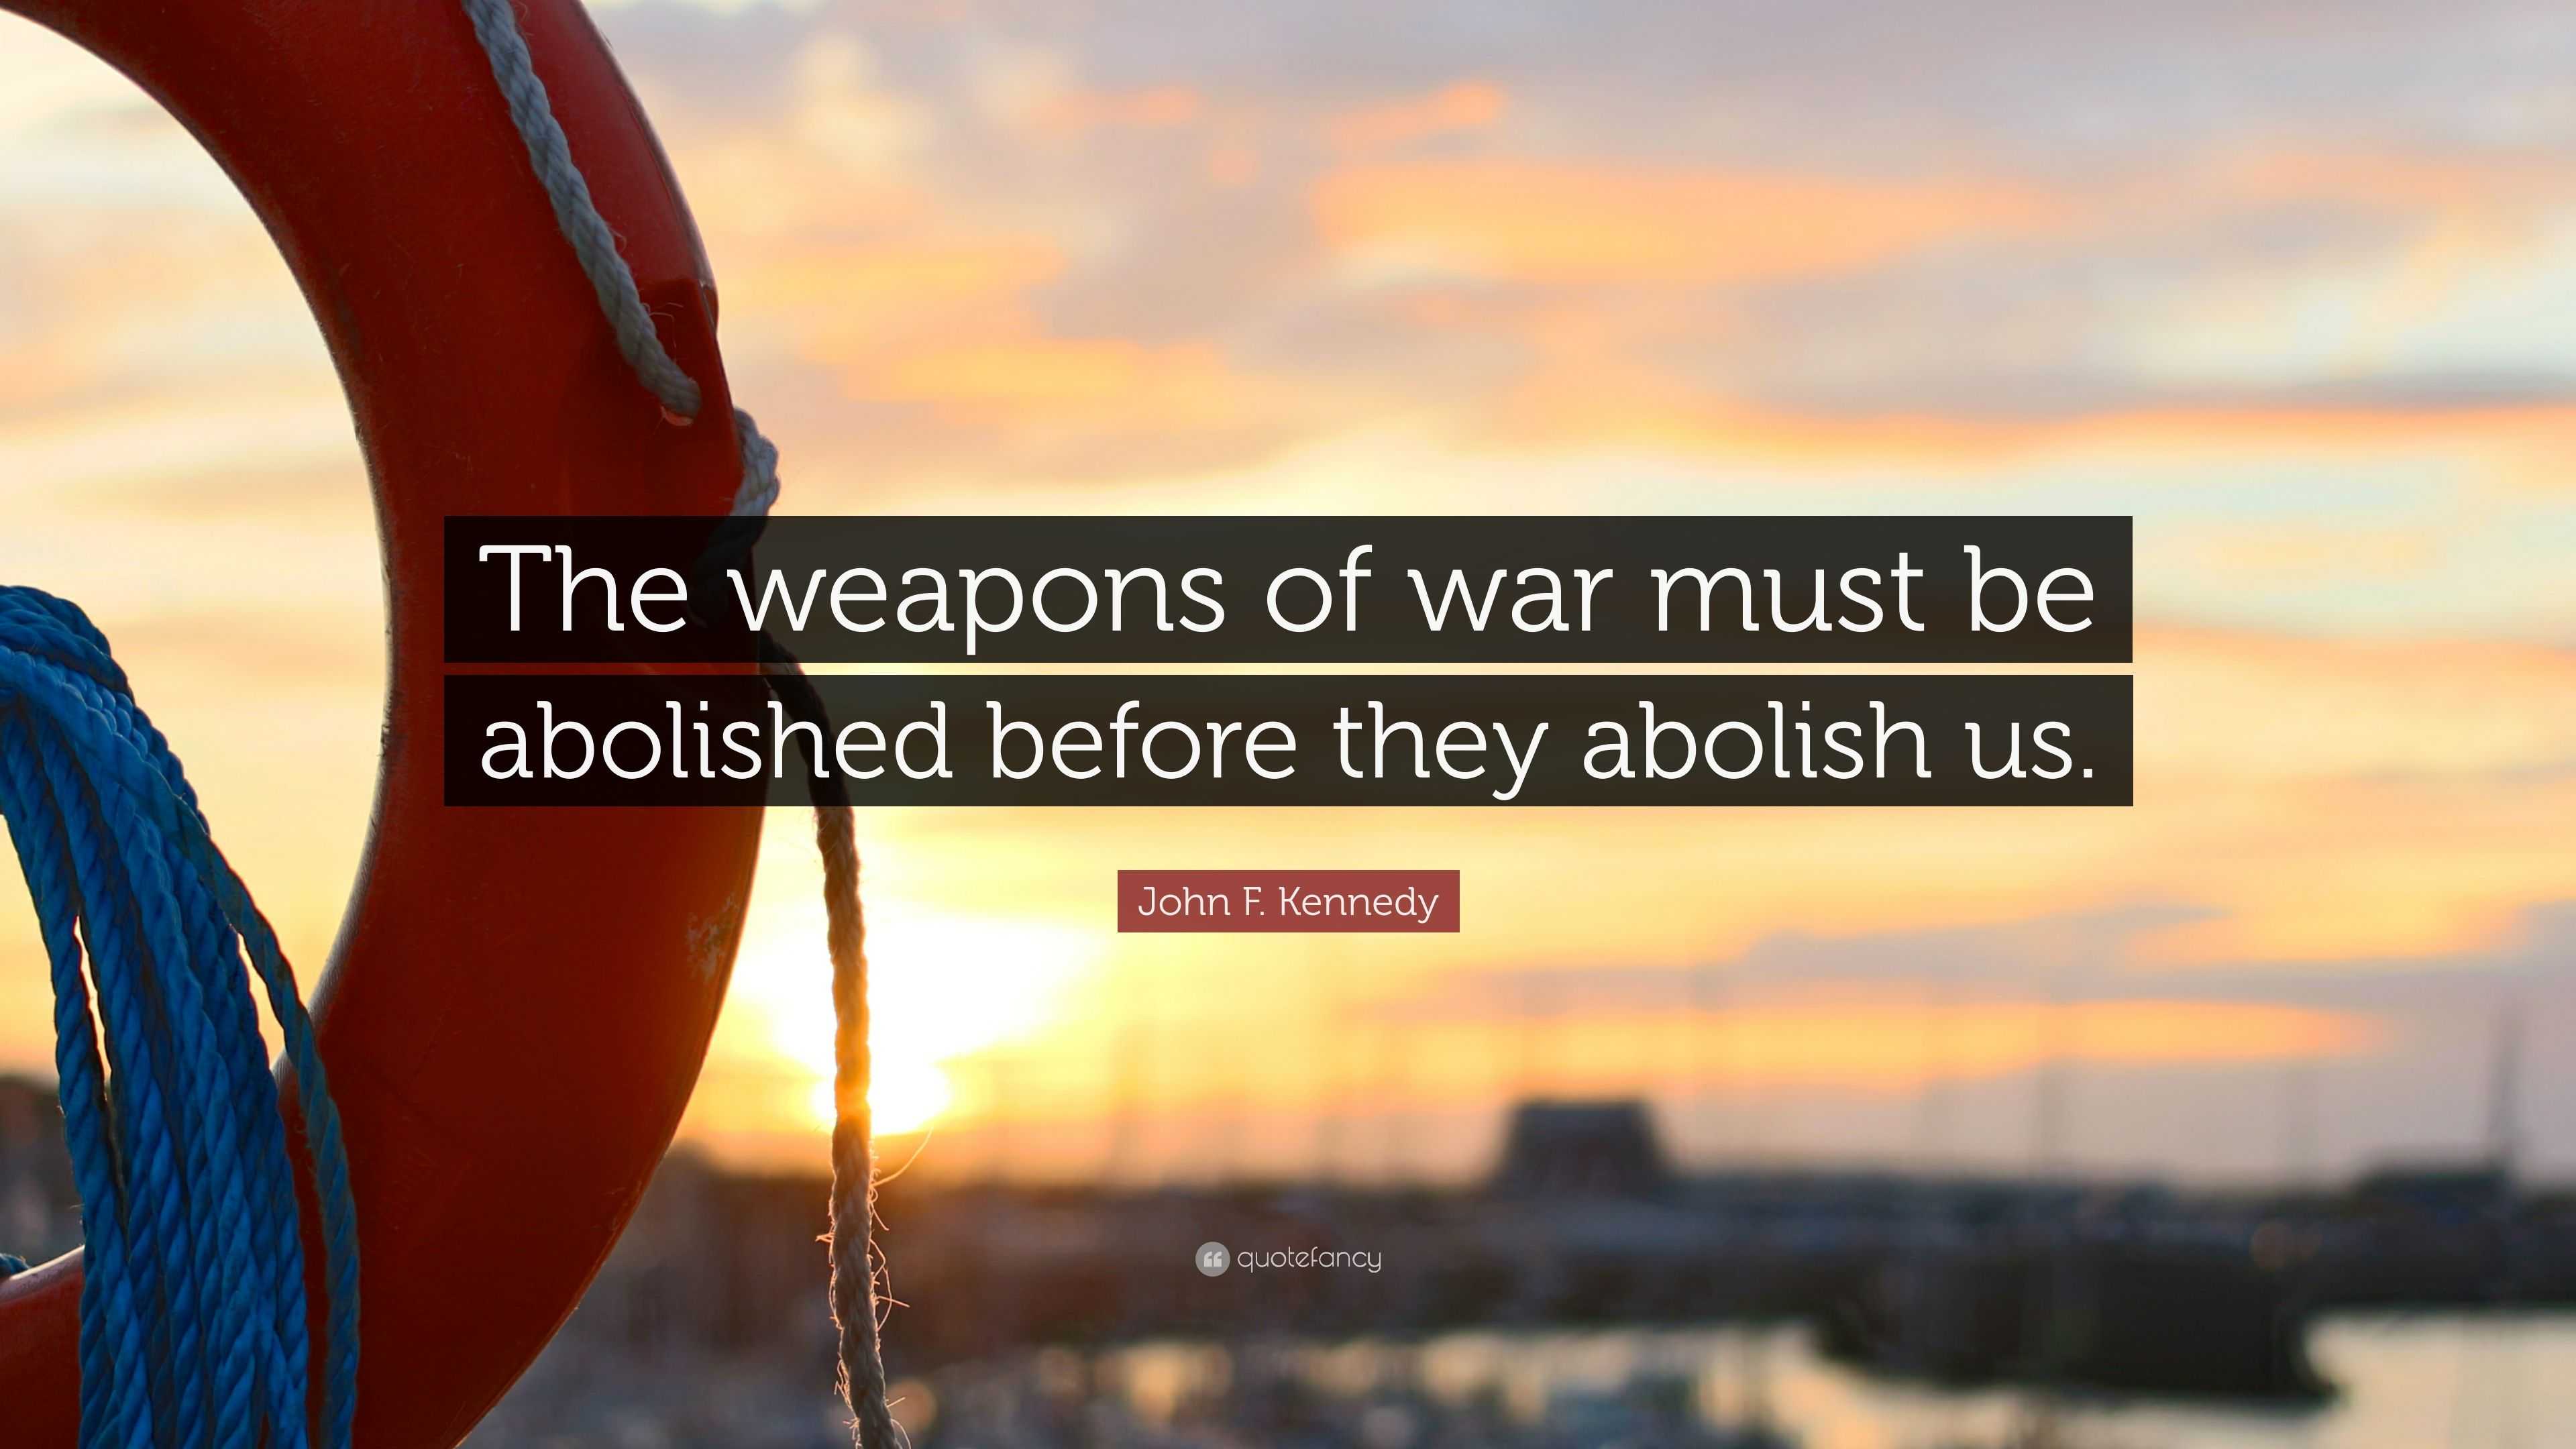 John F Kennedy Quote “the Weapons Of War Must Be Abolished Before They Abolish Us” 